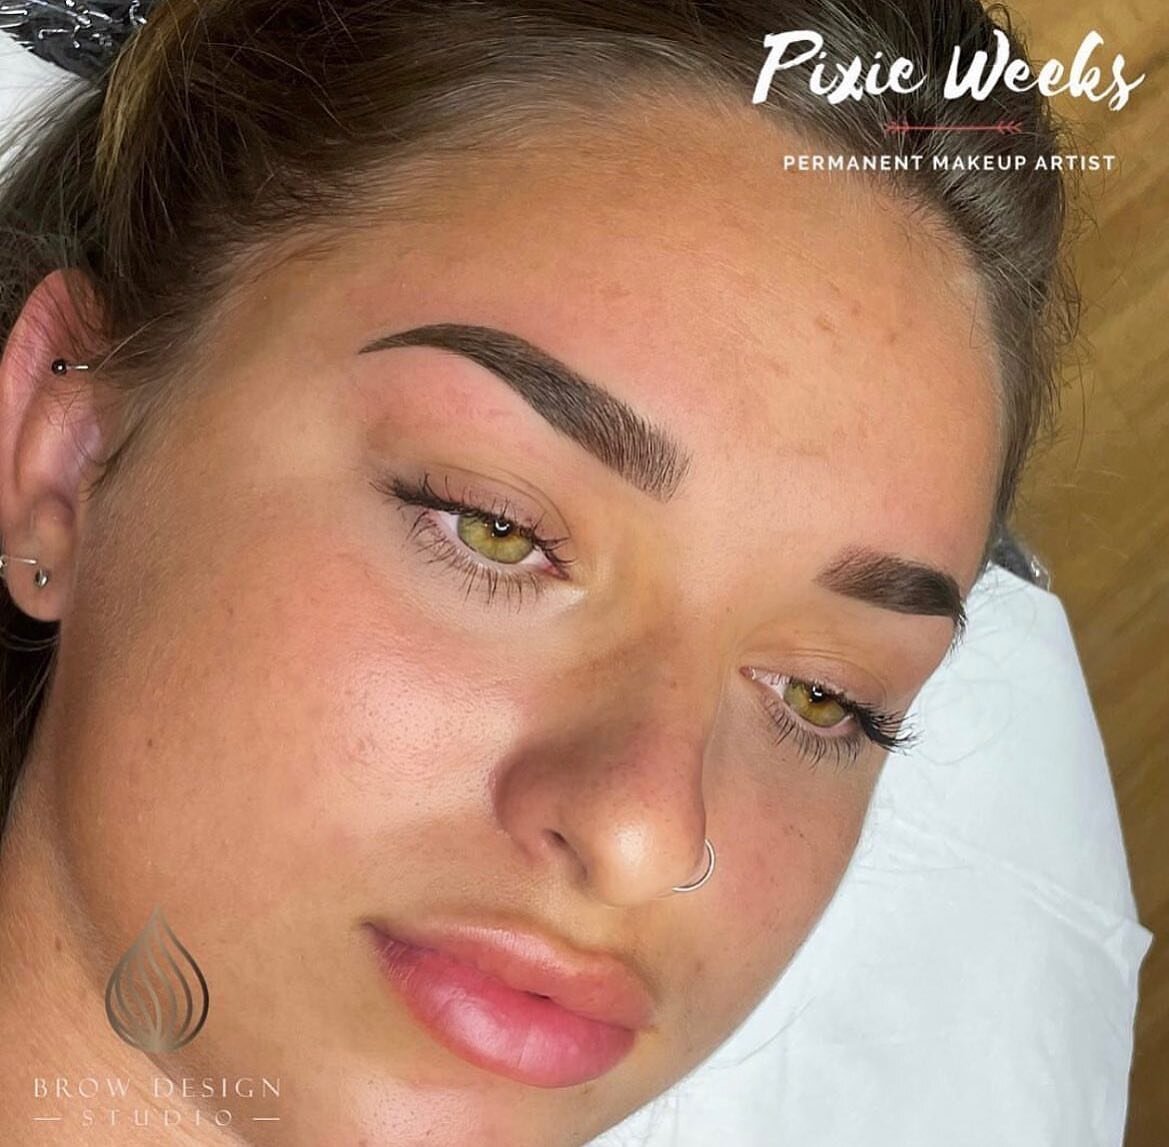 I&rsquo;m back at work in 5 days and September is getting pretty full up! If you&rsquo;re looking for a new treatment or colour boost in sept, drop me a message asap! 

✨✨✨✨

✨ Tattooed eyebrows by Pixie Weeks 
✨ &pound;310 including free follow up s